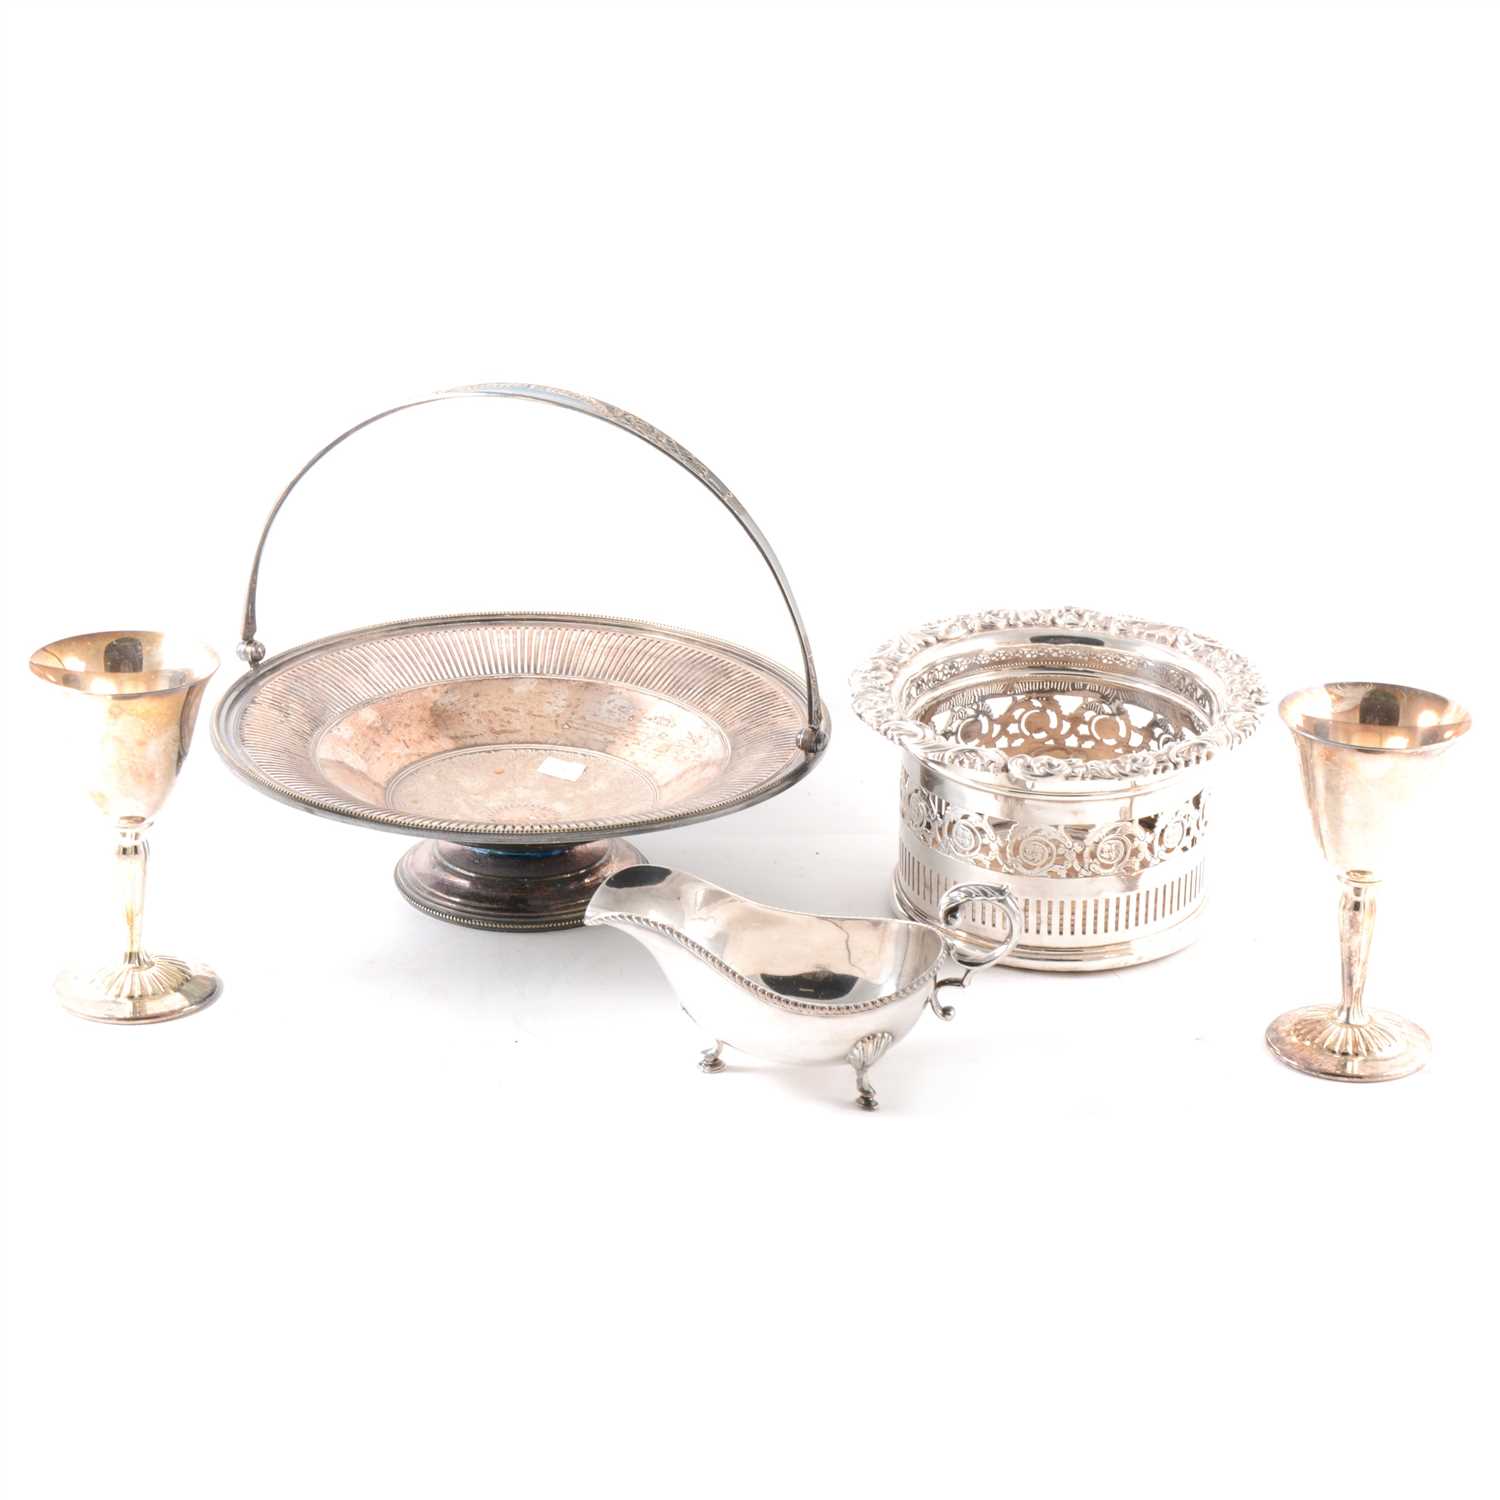 Lot 135 - Silver-plated ware, a pair of bottle coasters, entree dish, pair of sauce boats, trophies, flatware etc.